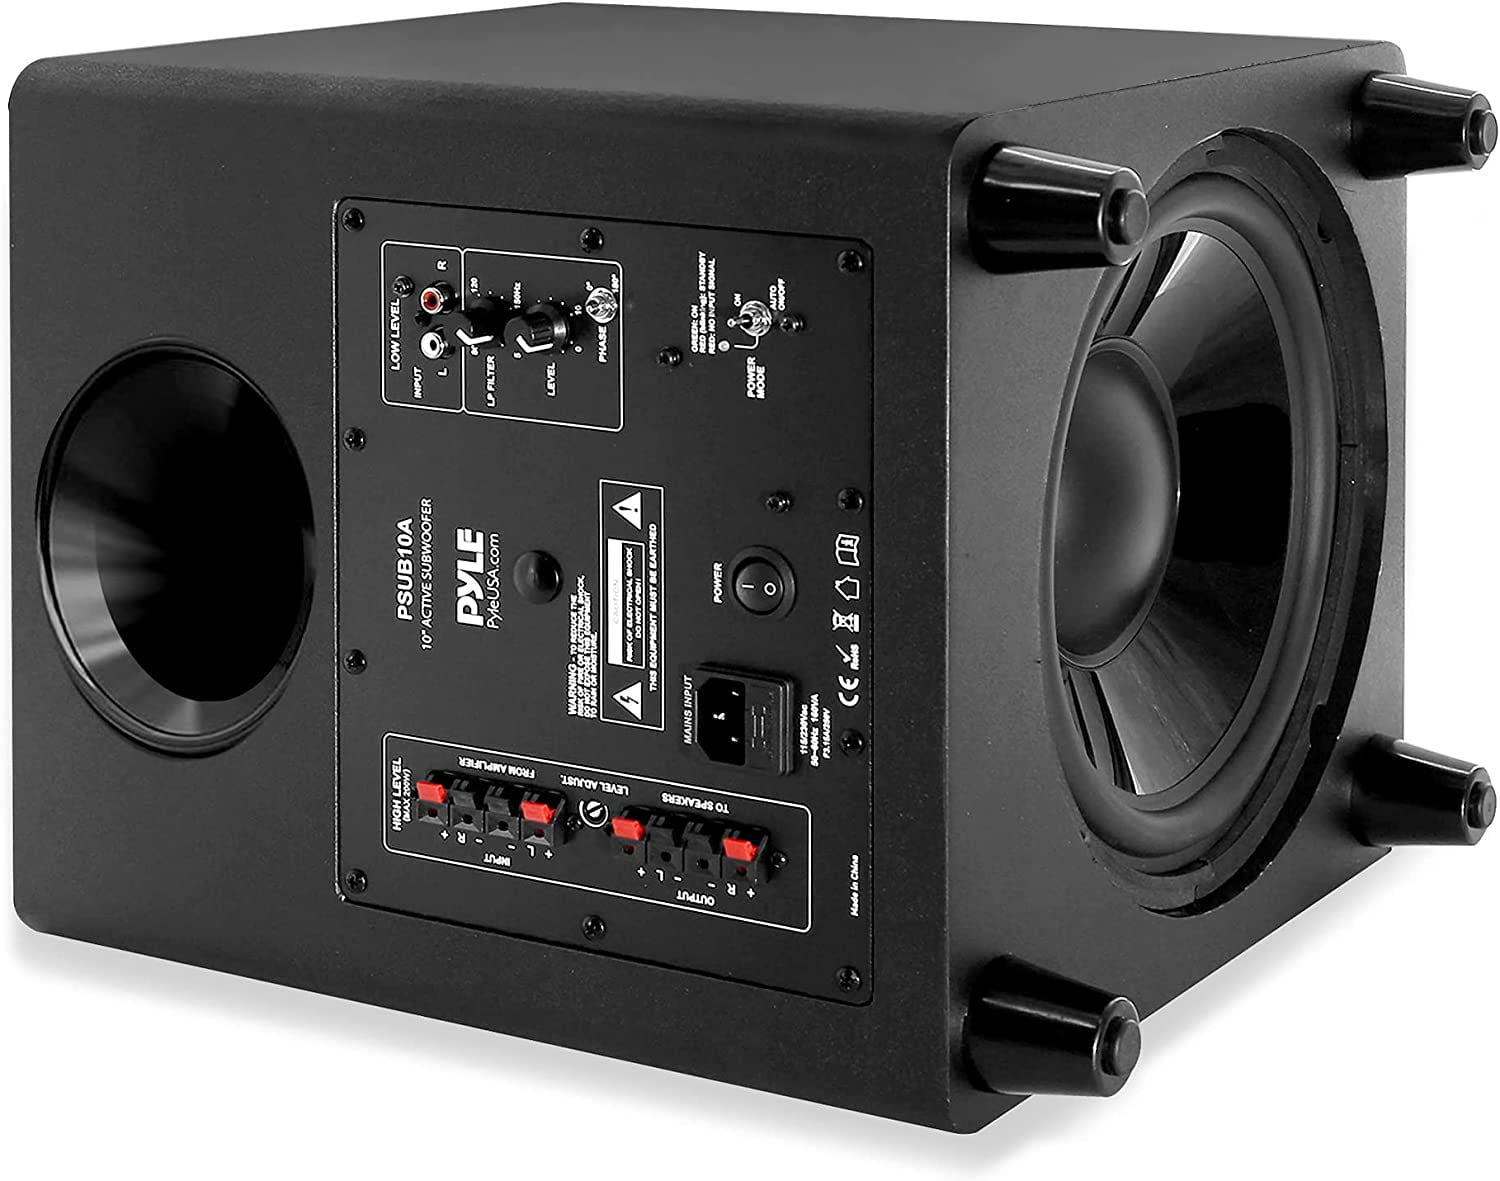 Pyle Active Down Firing Subwoofer - 10 Inches, Ported with High-to-Low Input Level Controller, Invisible Down-Firing Speaker, Black, Built-in Convenience - Walmart.com